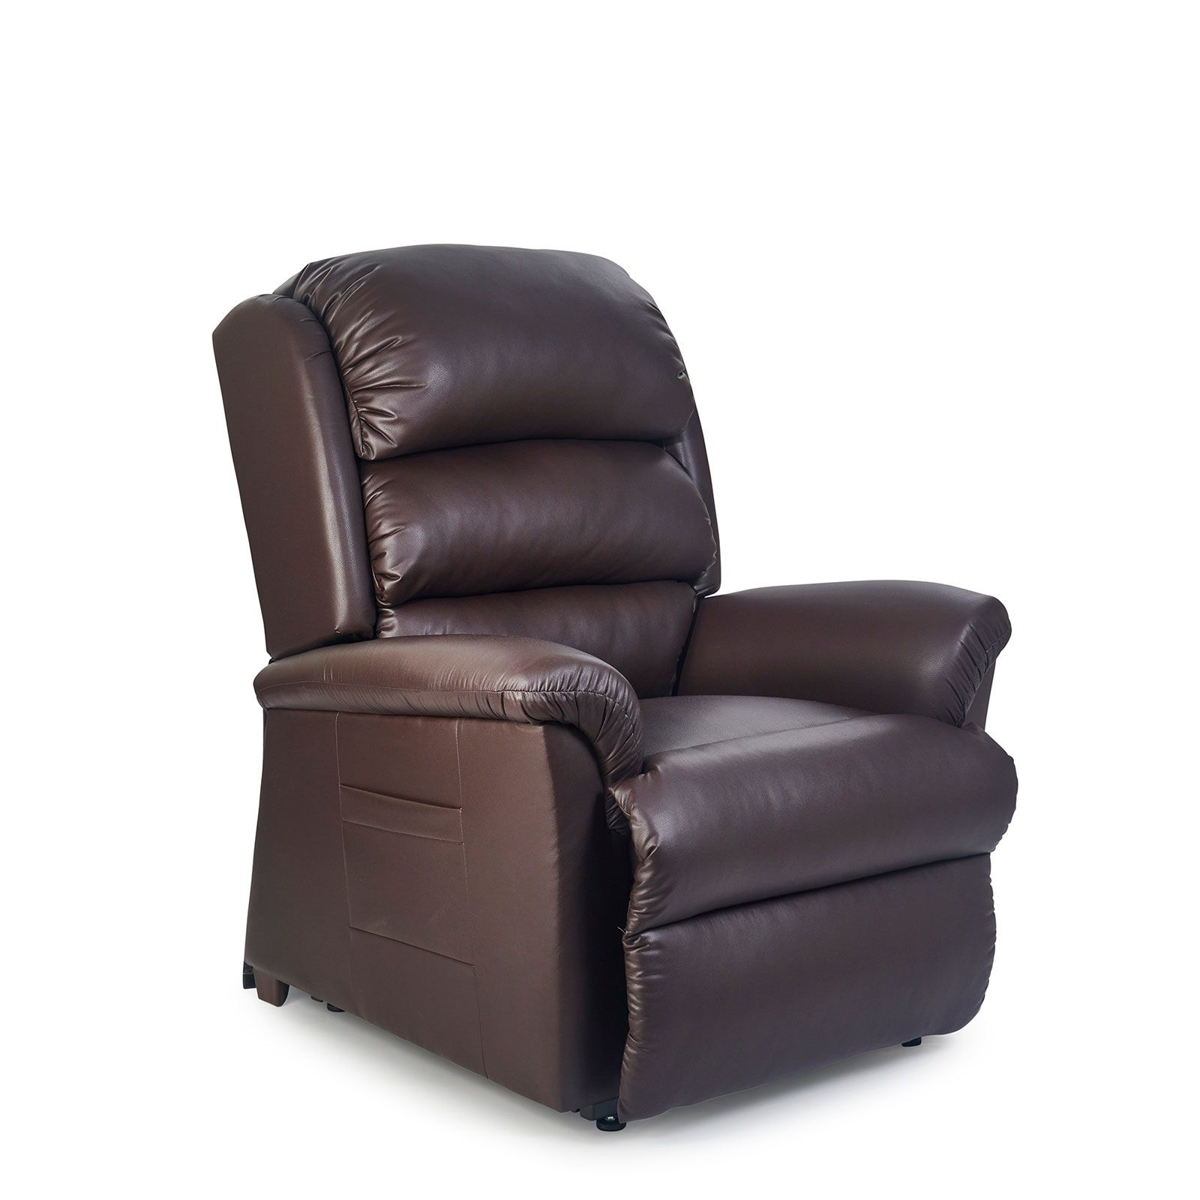 Picture of Polaris Coffee Bean Brisa Large Lift Chair